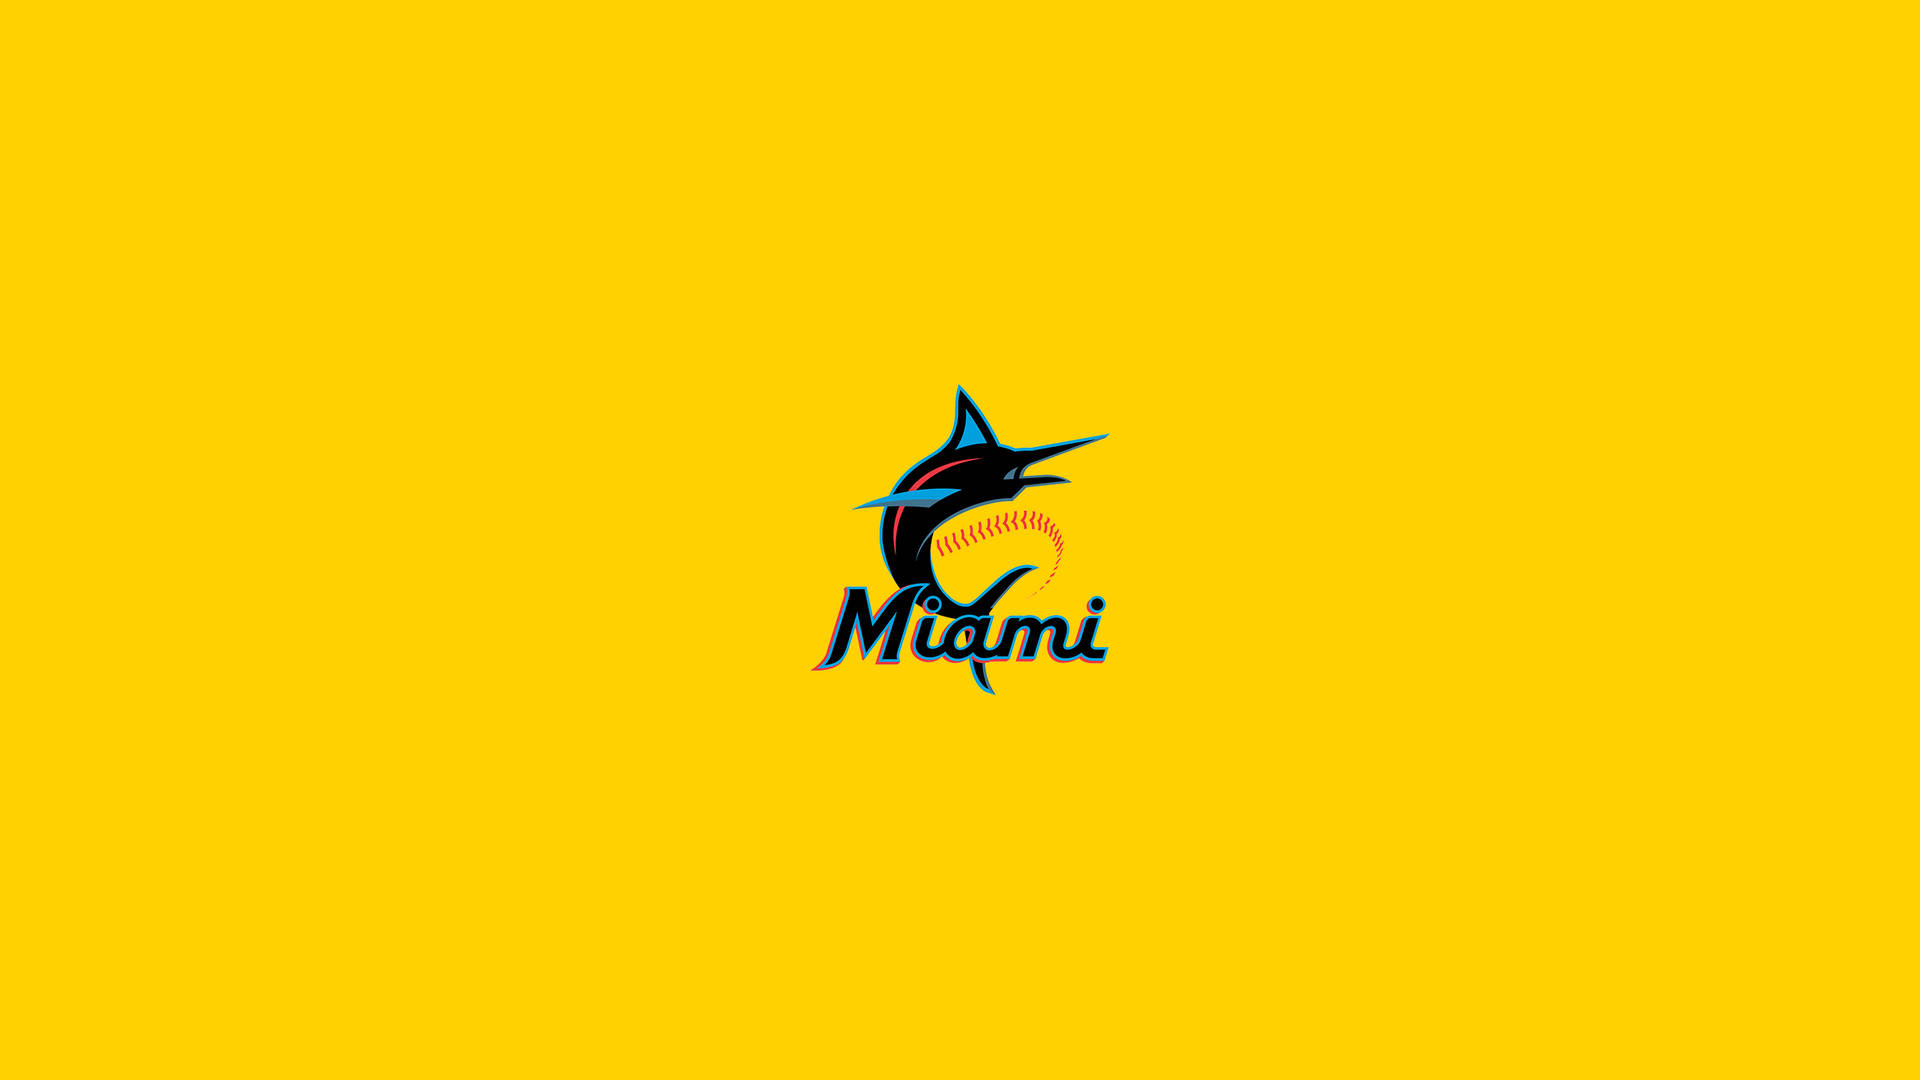 Miami Marlins 2019 Yellow Aesthetic Background